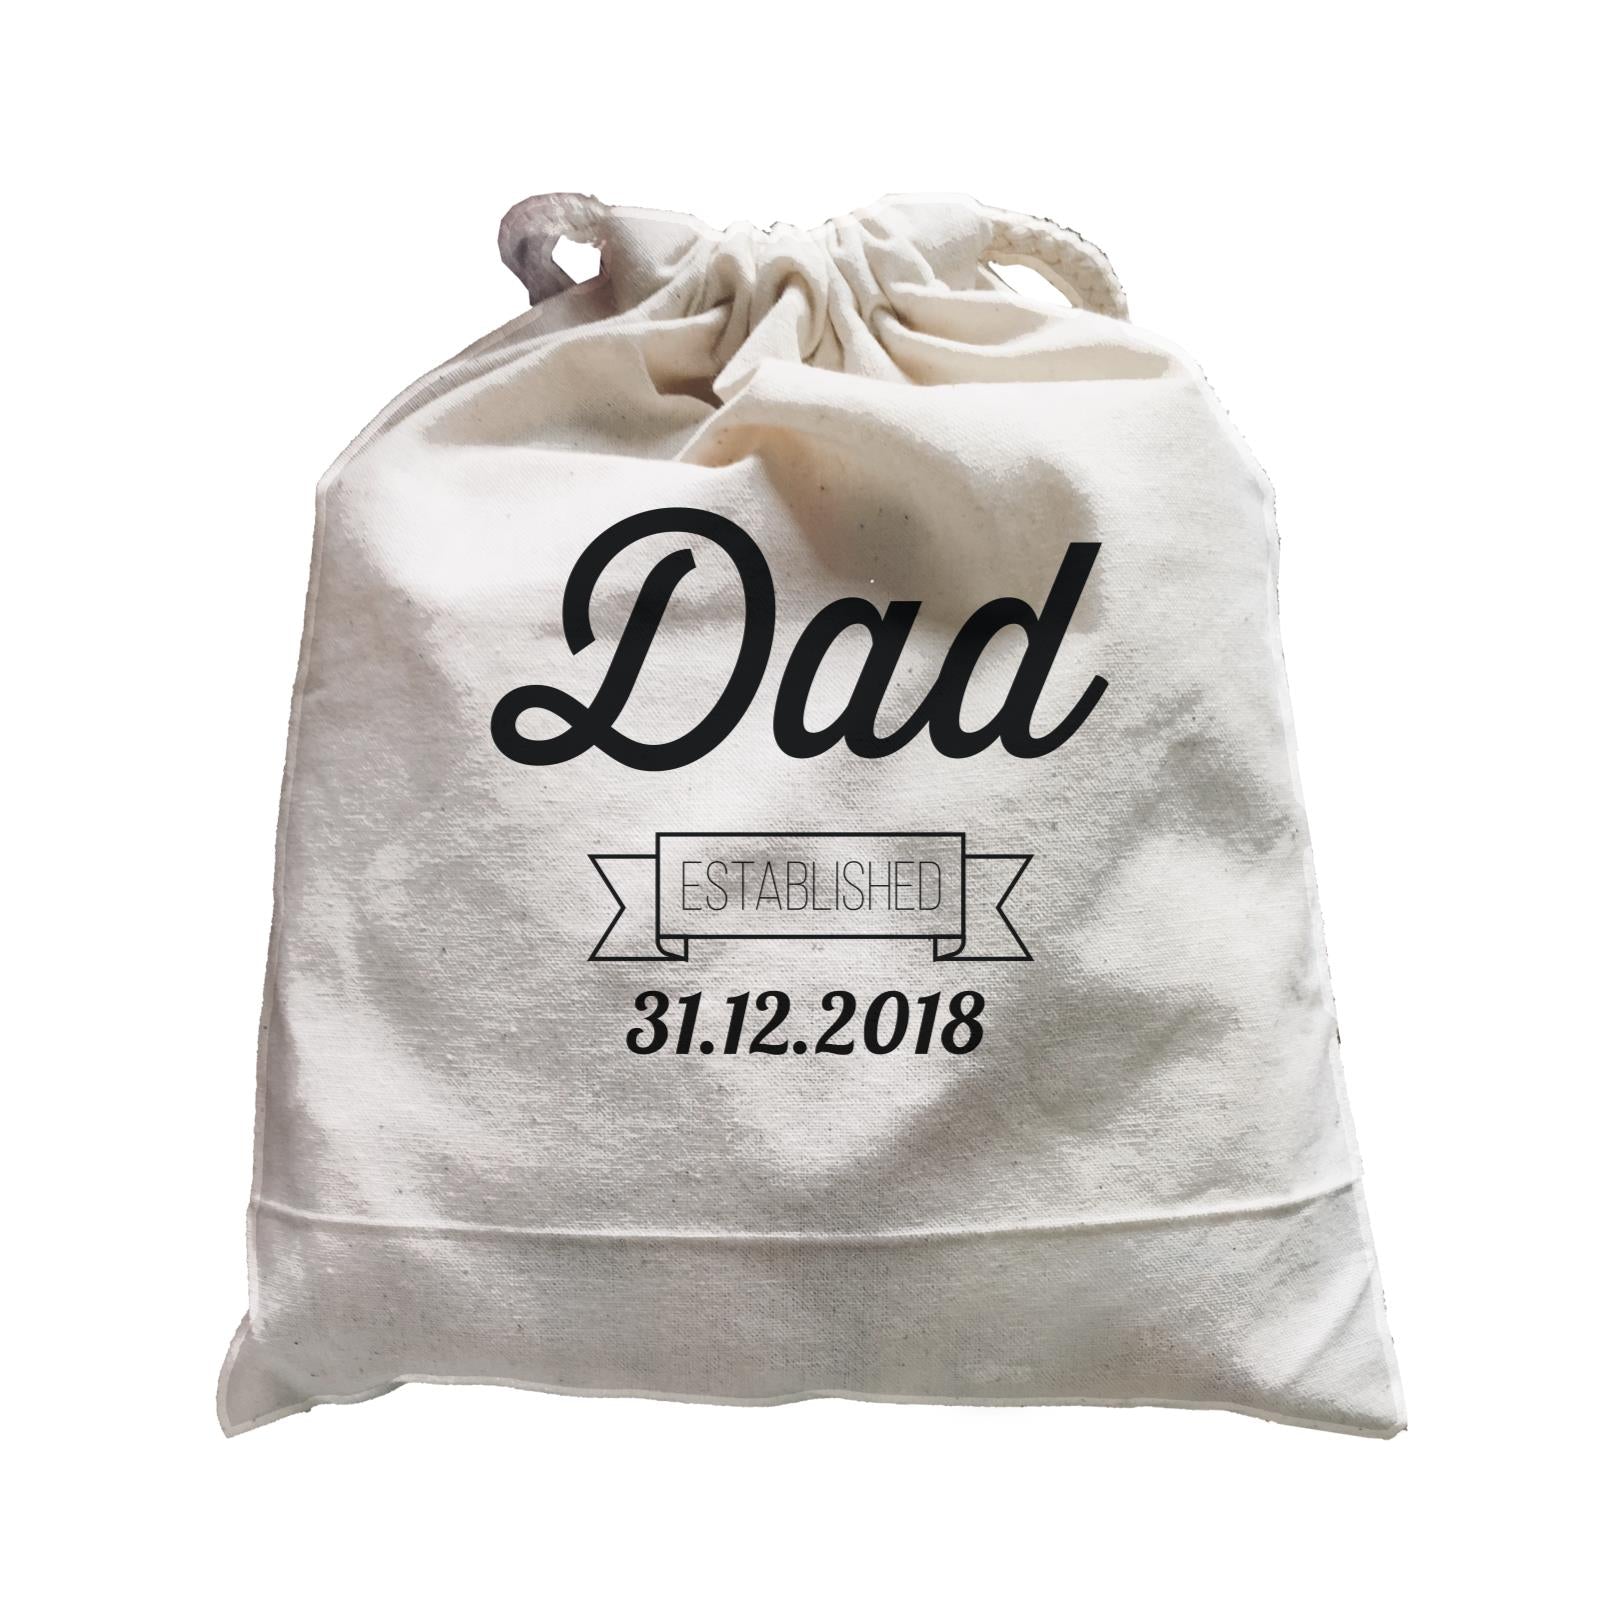 Dad Established Typography With Date Satchel